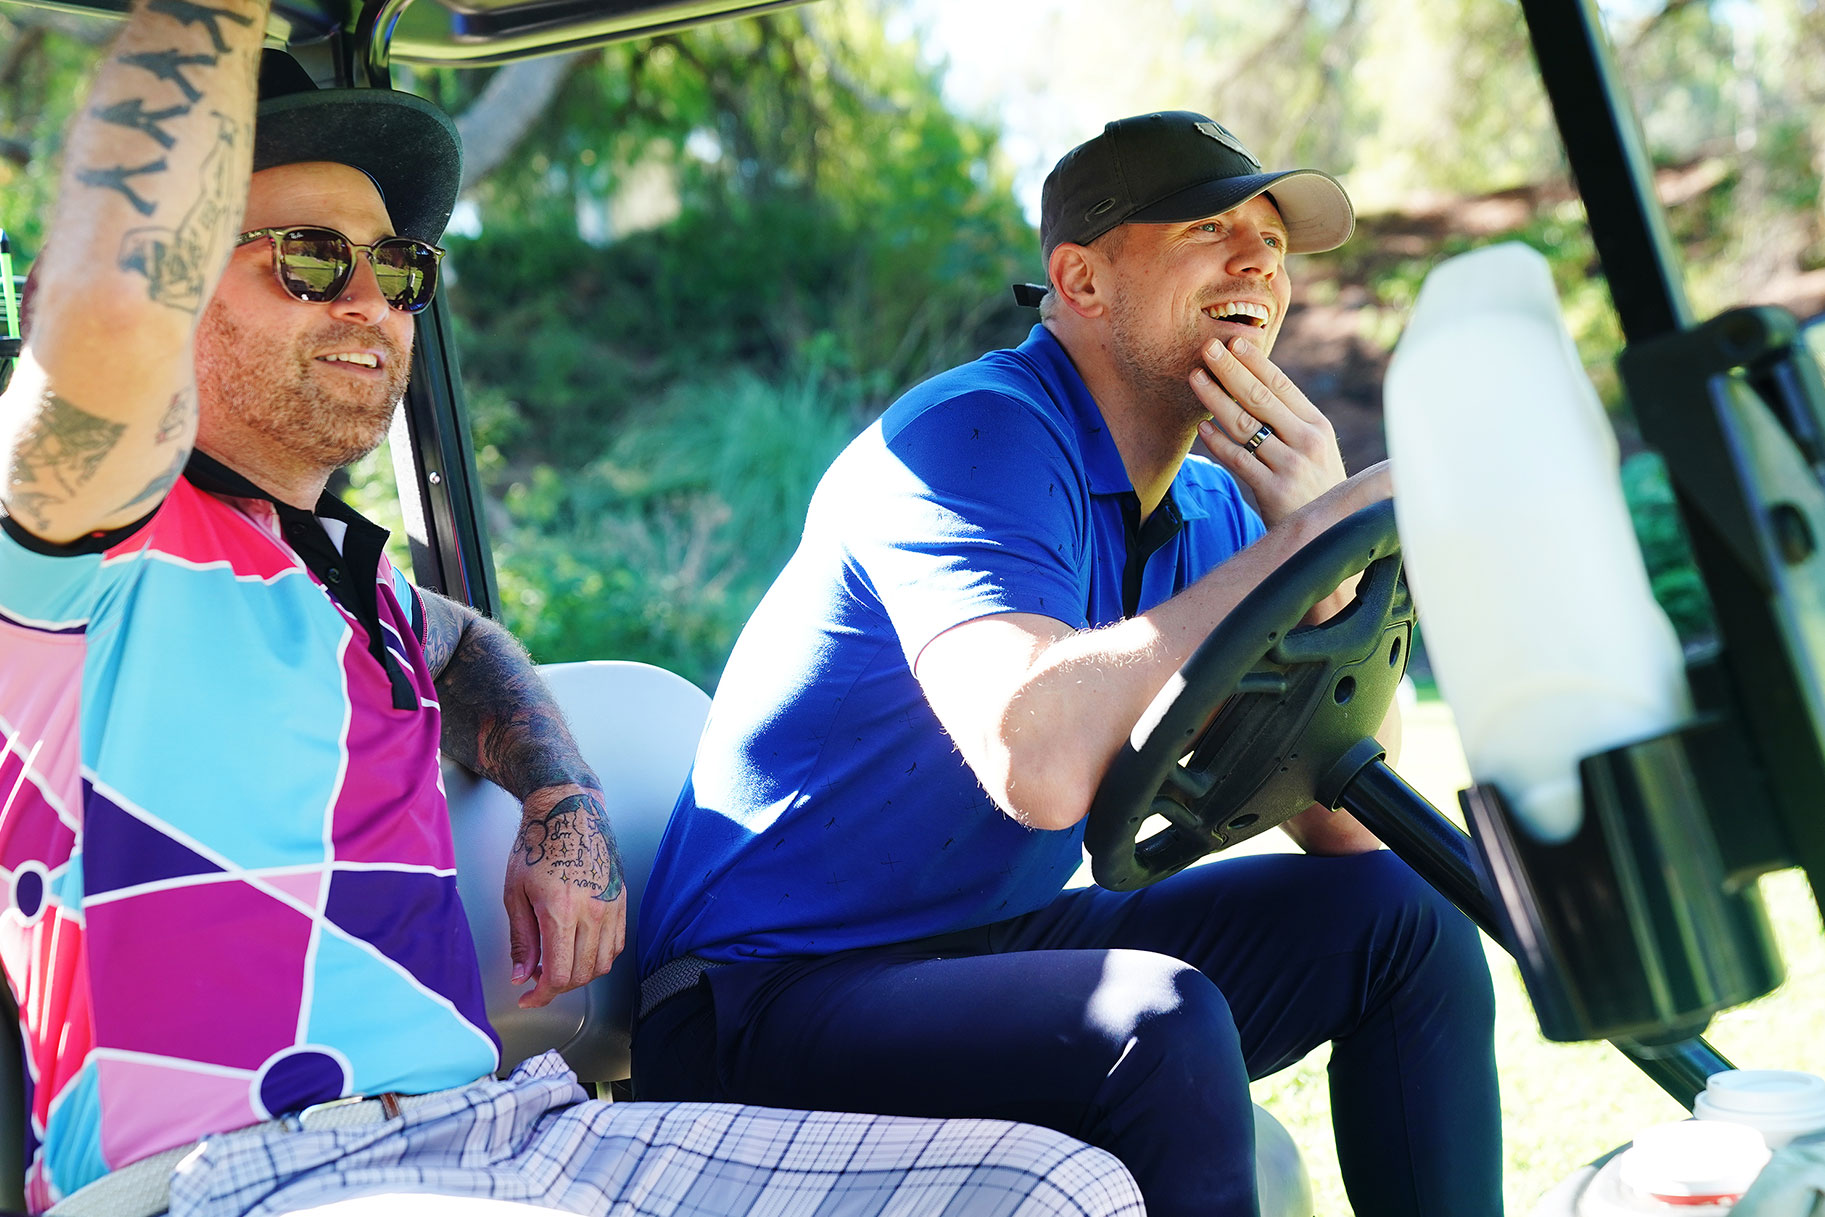 Close up of the Miz and a friend riding in a golf cart